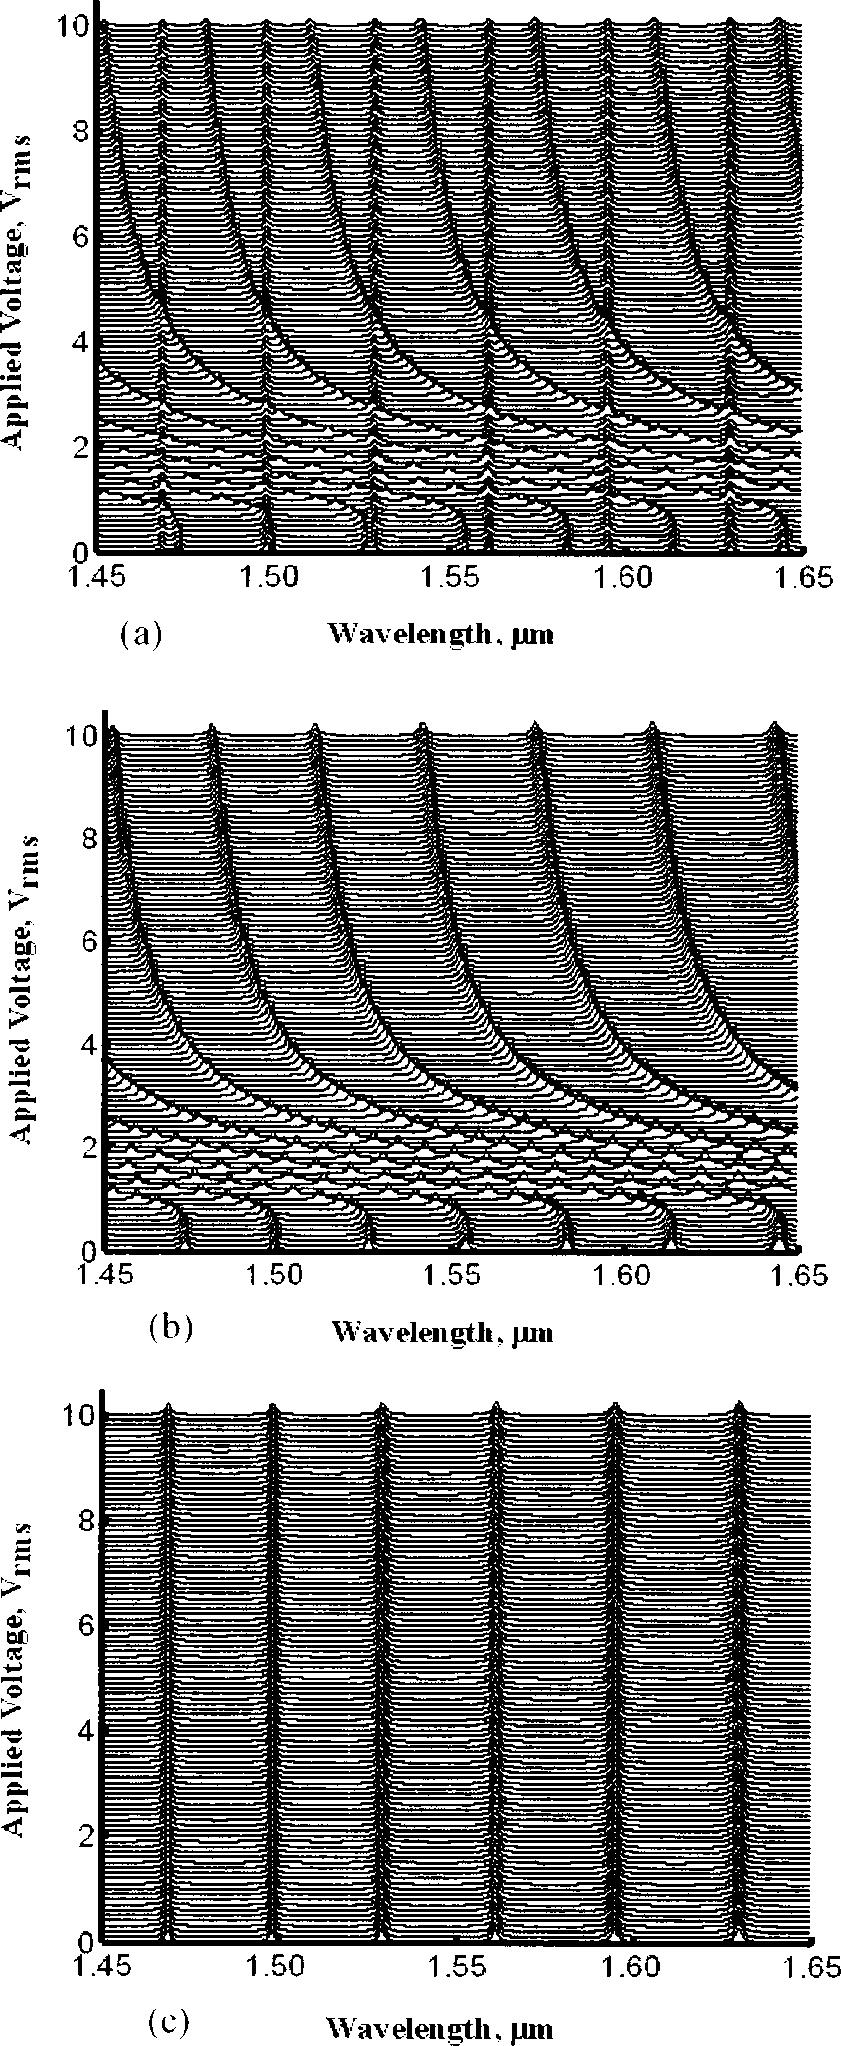 J. Appl. Phys., Vol. 93, No. 5, March 23 Huang, Wu, and Wu 2493 9 -TN cell the rear LC director is twisted 9 from the front. 9 The electric field is applied in the longitudinal direction.